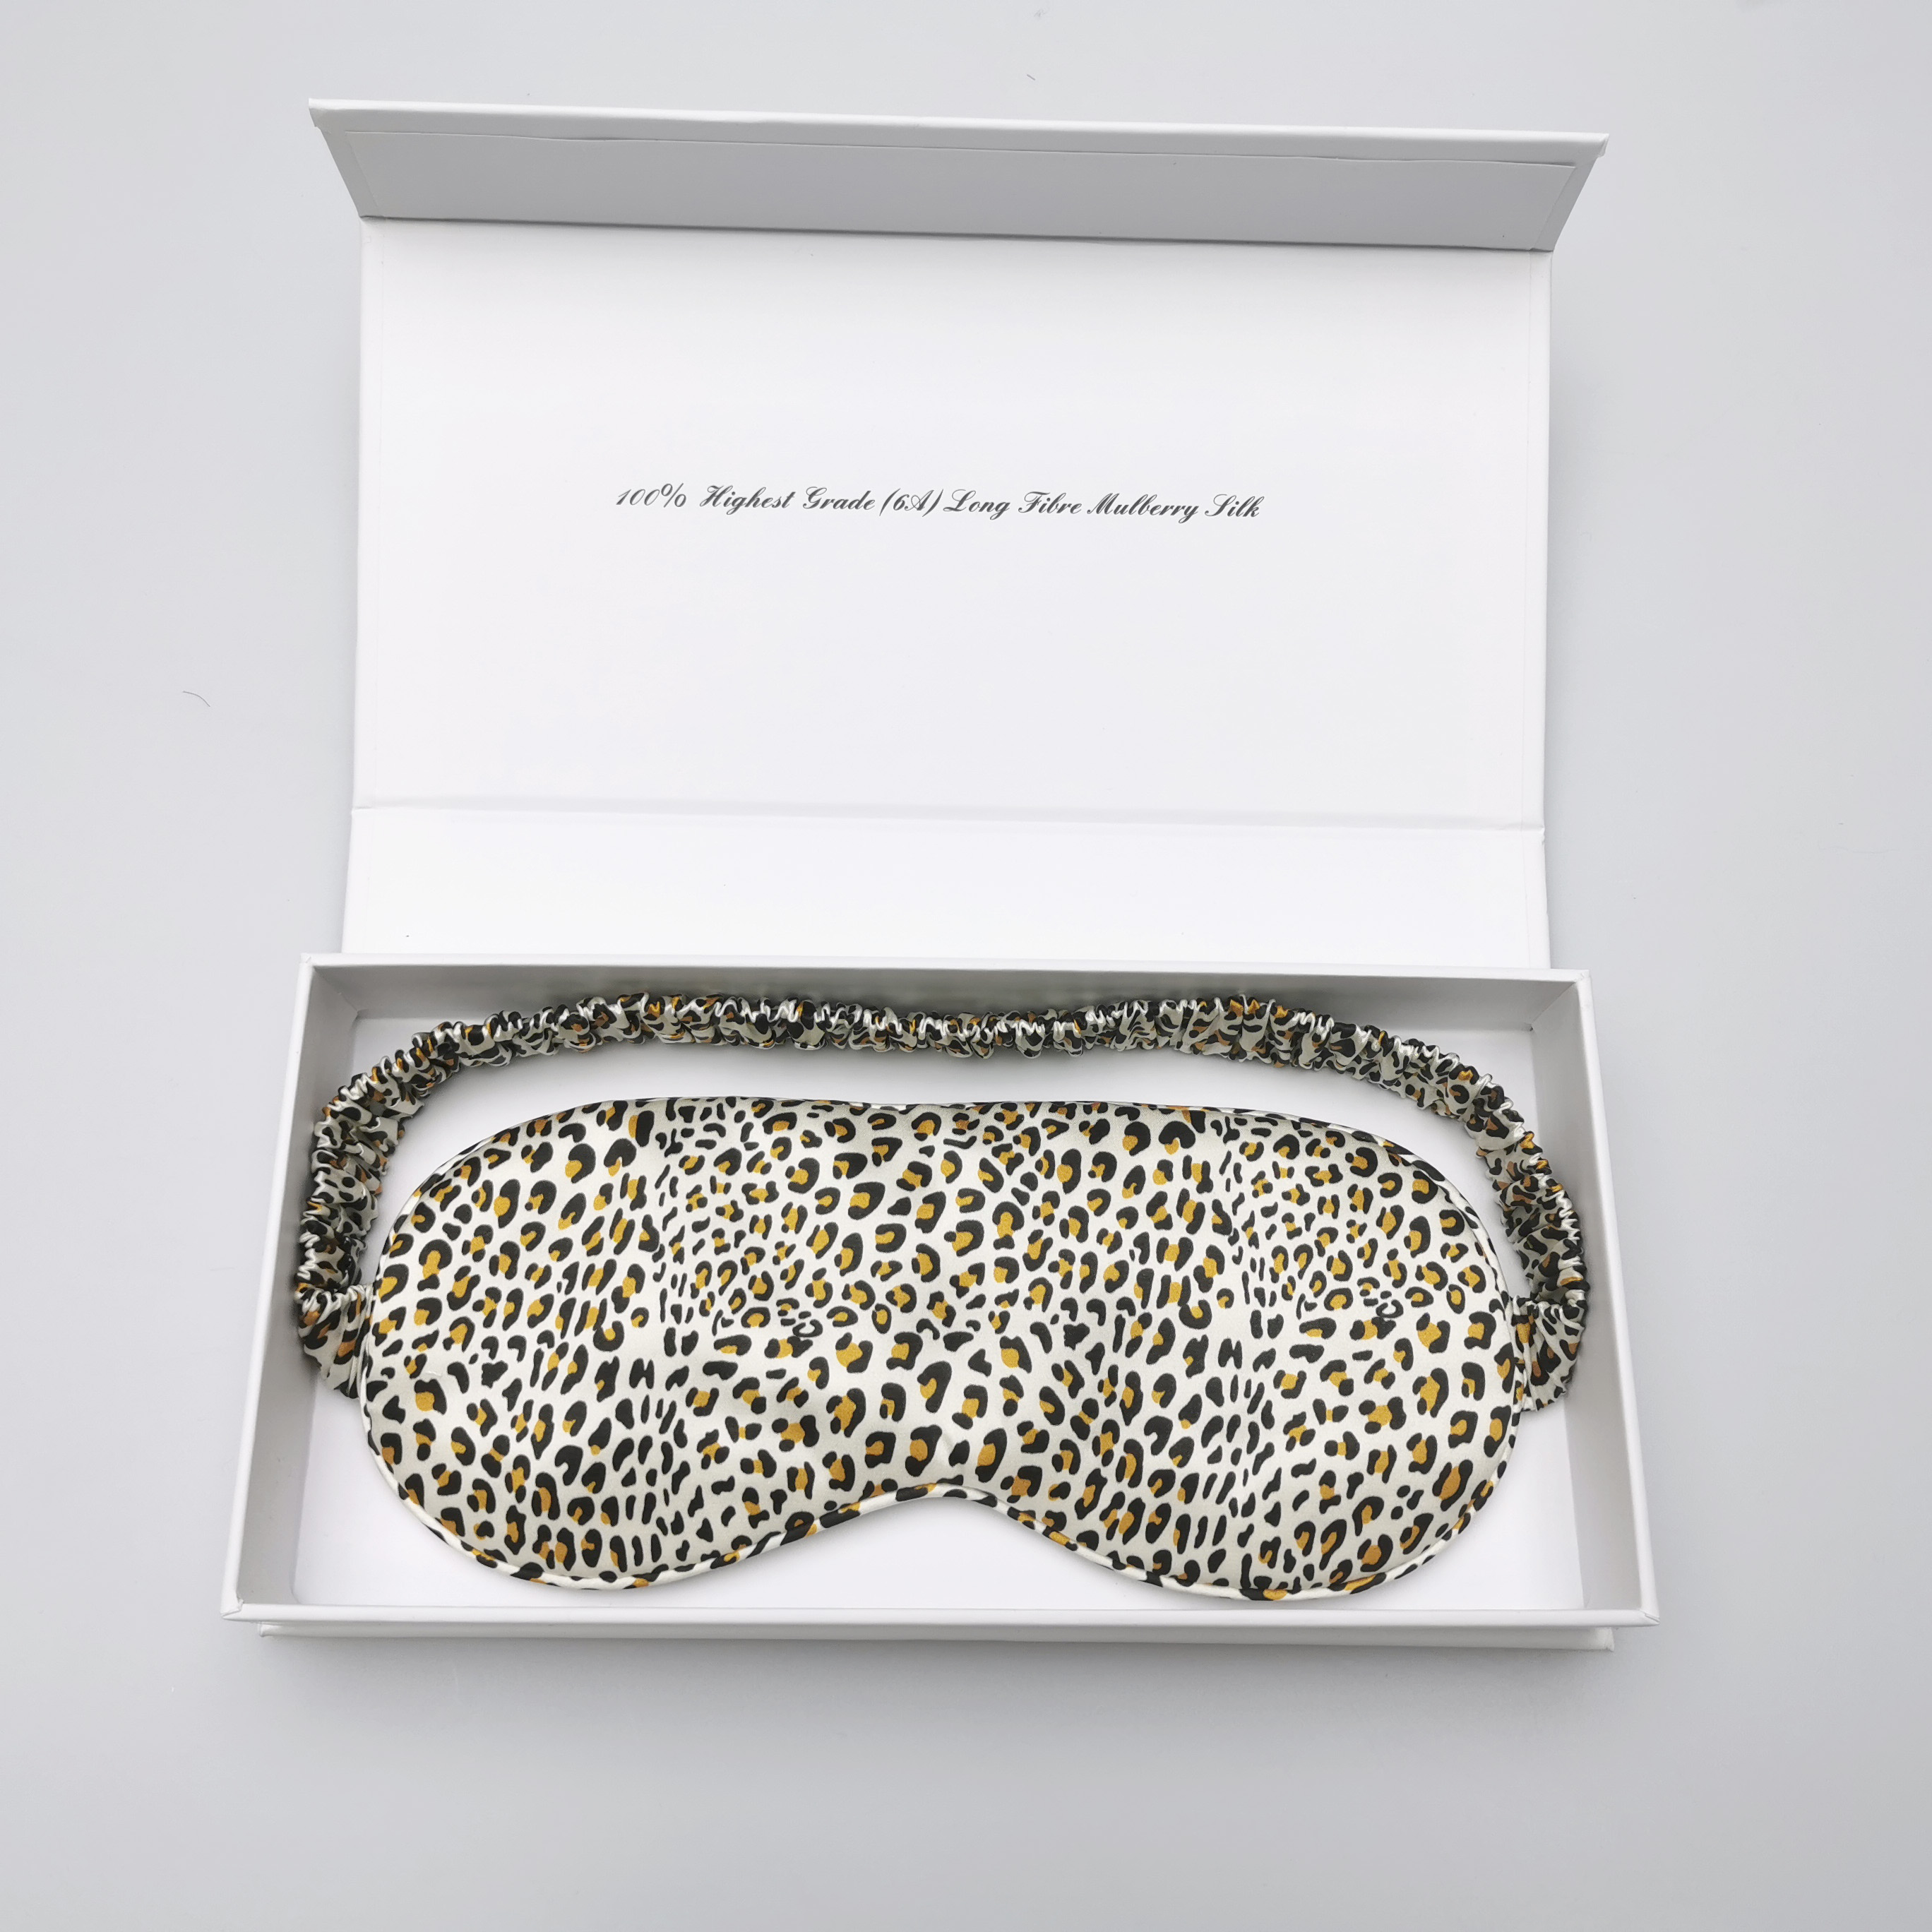 Custom and Wholesale Leopard Pattern Print Pure Mulberry Silk Eyemask Set for Promotion